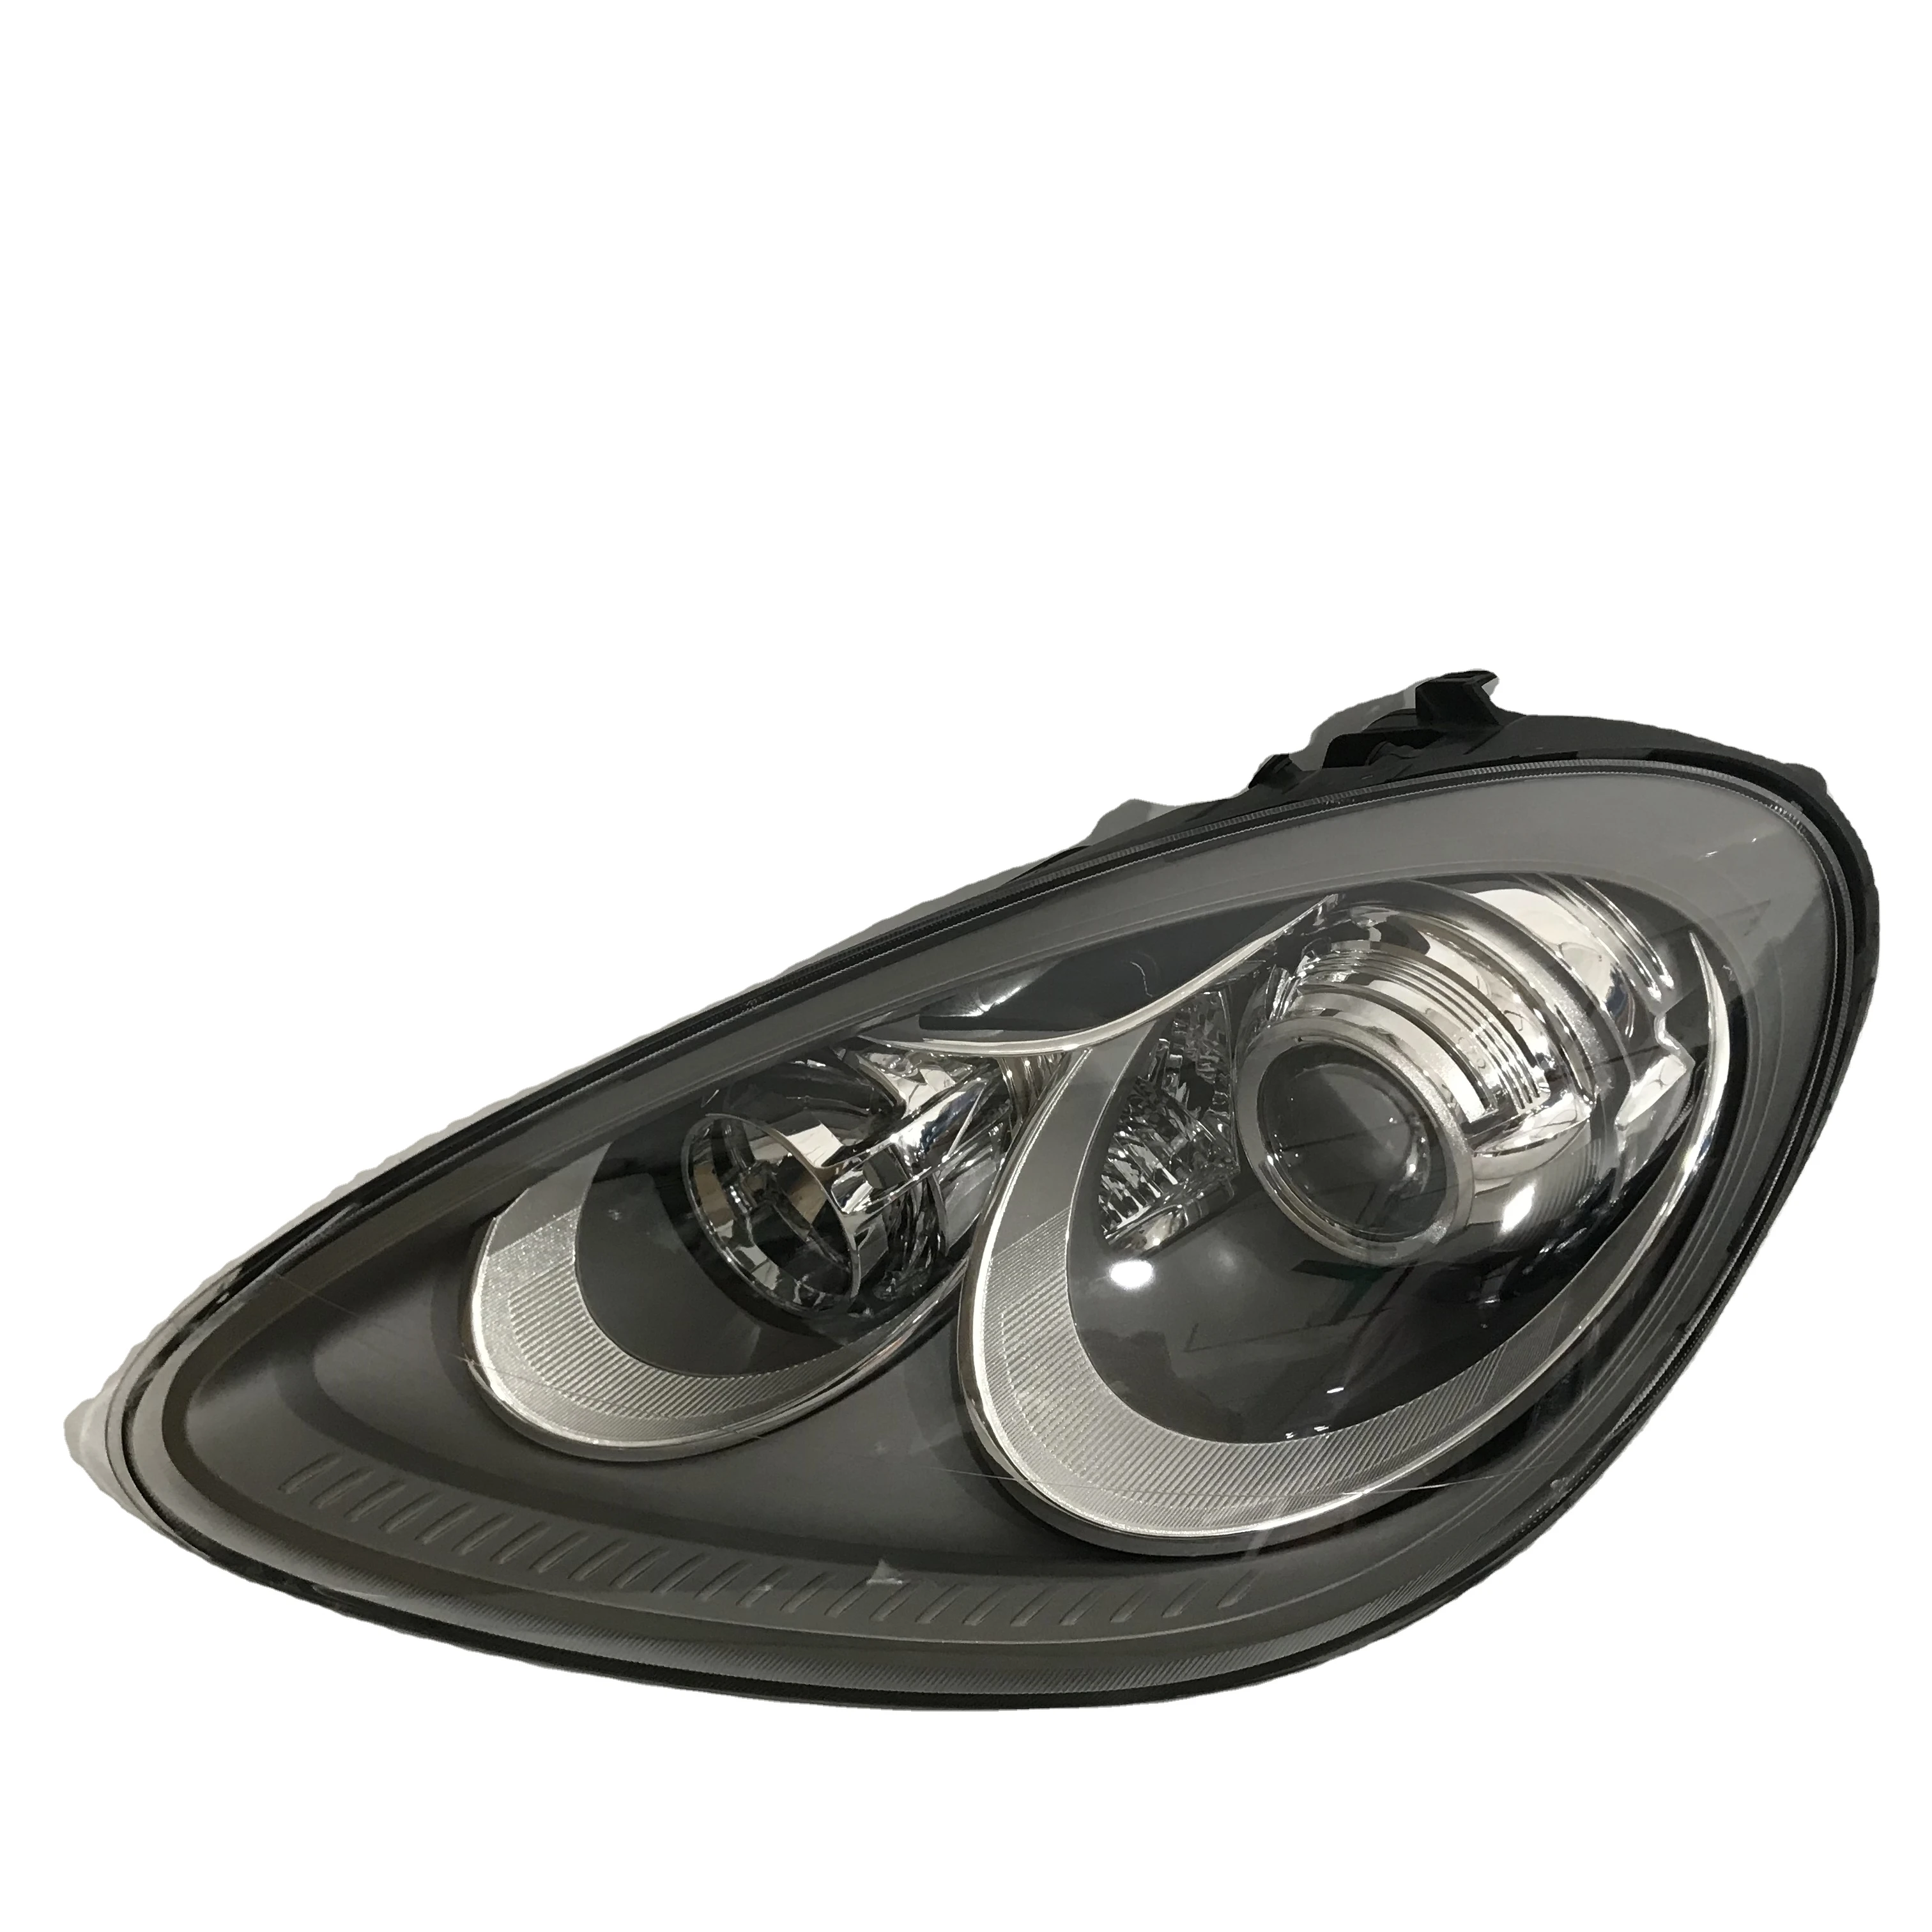 

Suitable For Porsche Cayenne 2012 Car Headlamp Factory Direct Sales Front Headlight Auto Lighting Systems Headlamps